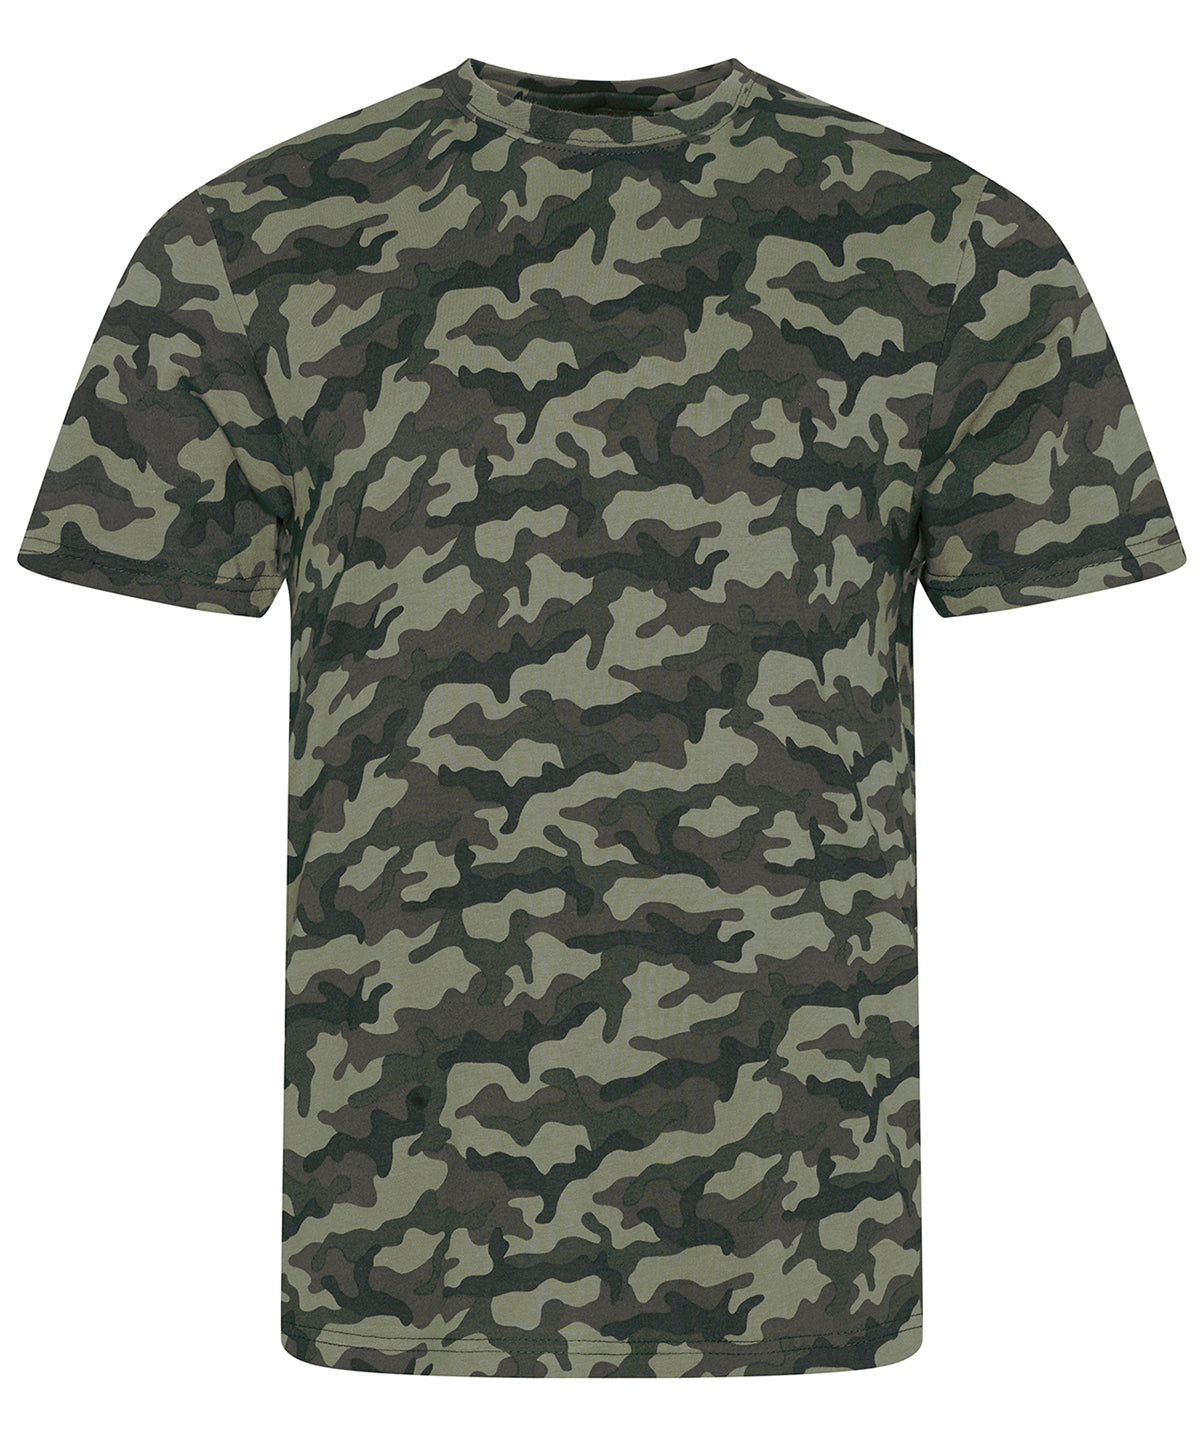 Personalised T-Shirts - Camouflage AWDis Just T's Camo T